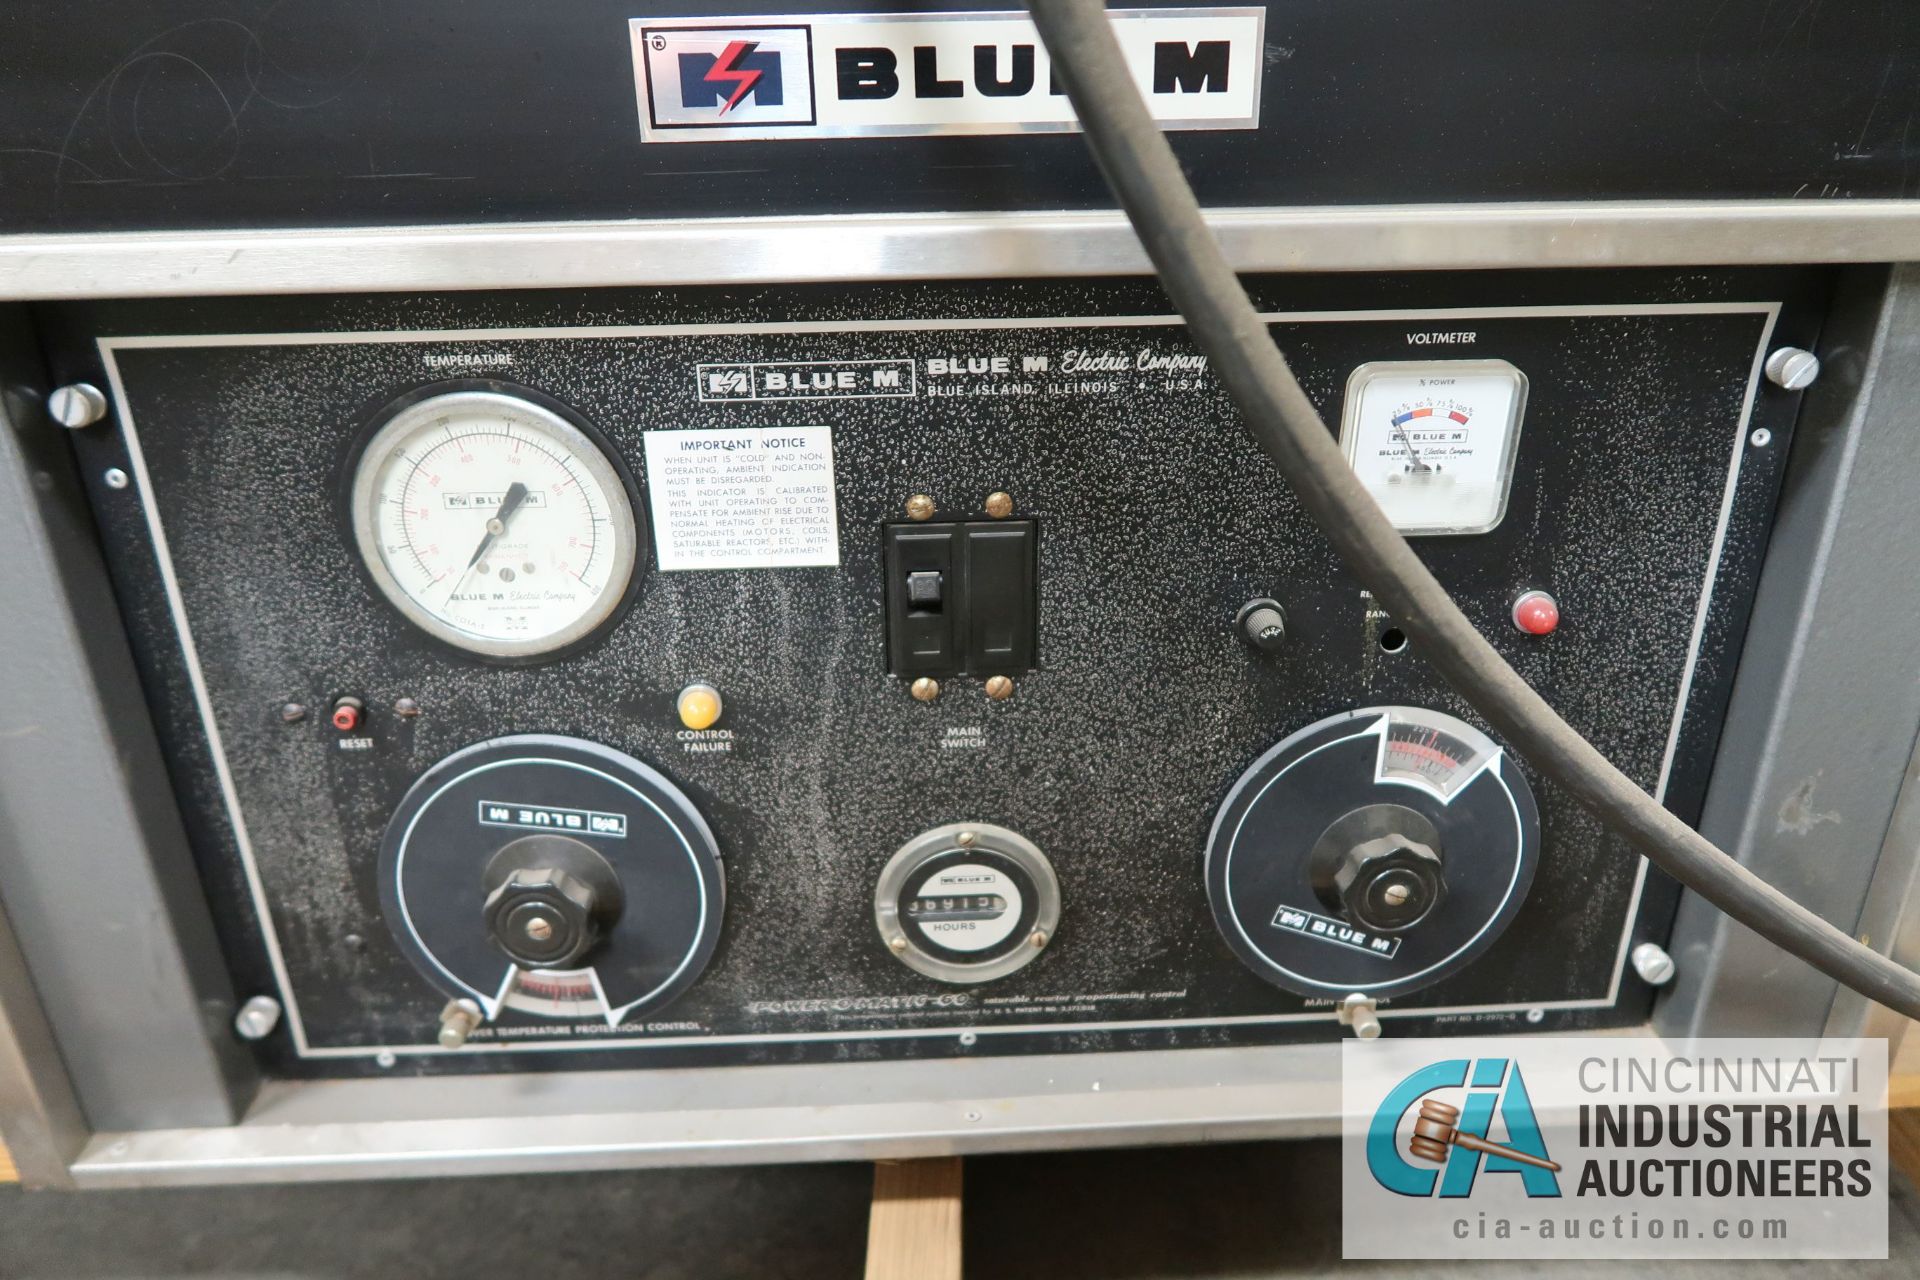 BLUE M IGF-146C-3X ELECTRIC LAB OVEN; S/N IG1-200, TEMP RANGE 100 C TO 316 C, CHAMBER DIMENSIONS 14" - Image 2 of 4